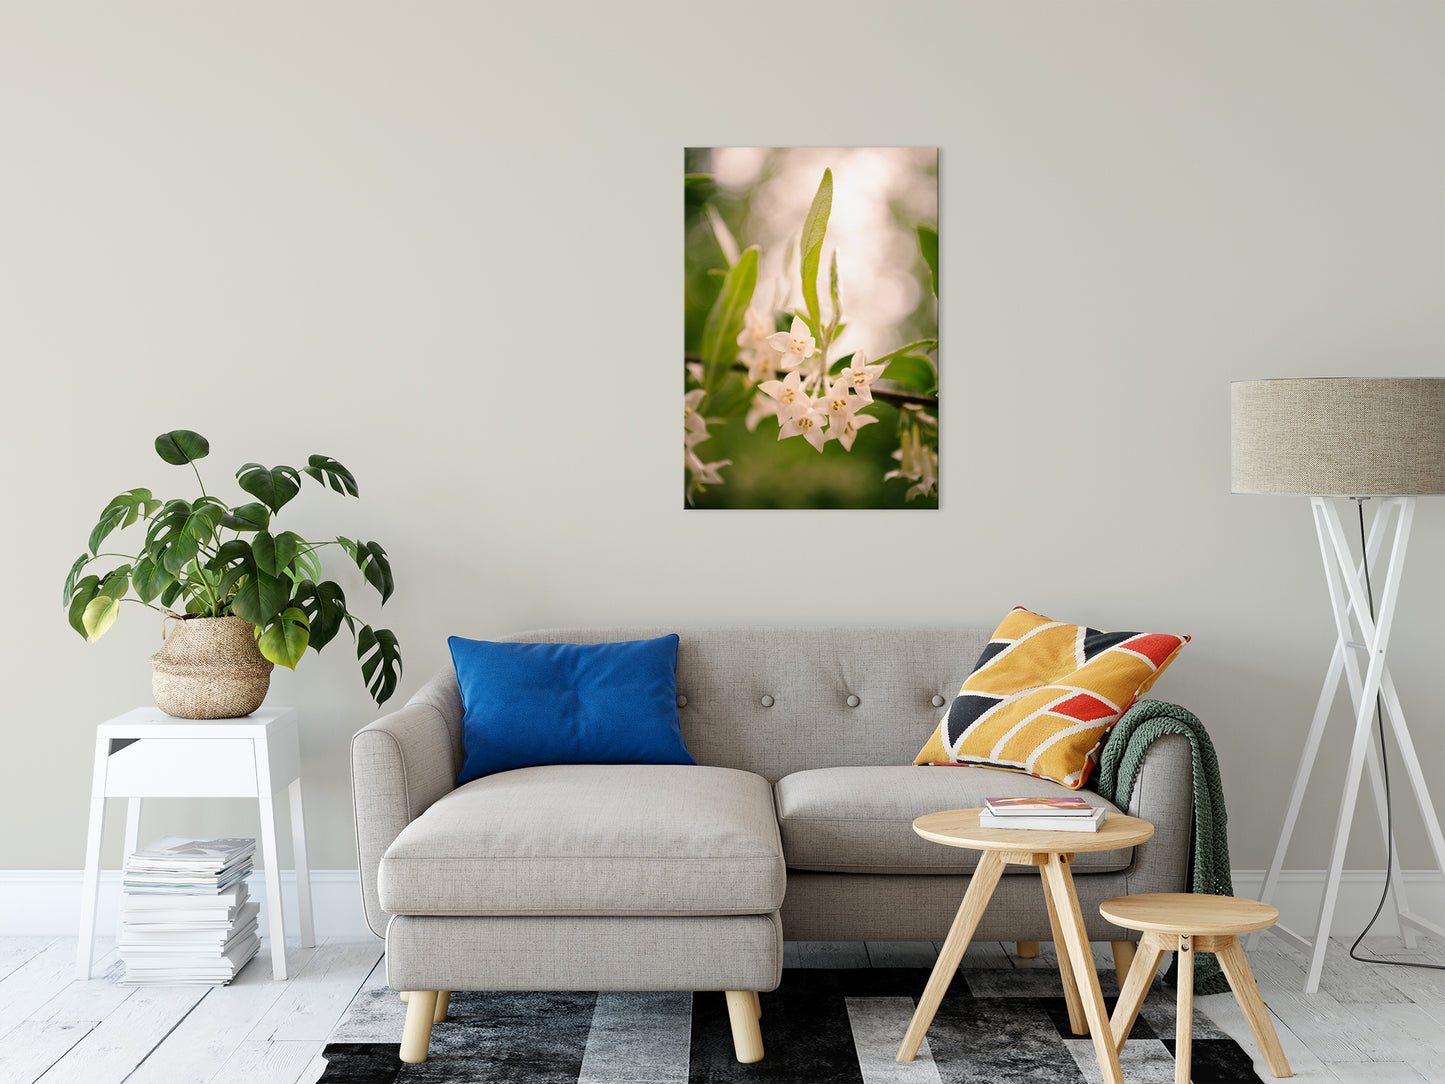 Floral Tranquility Nature / Floral Photo Fine Art Canvas Wall Art Prints 24" x 36" - PIPAFINEART